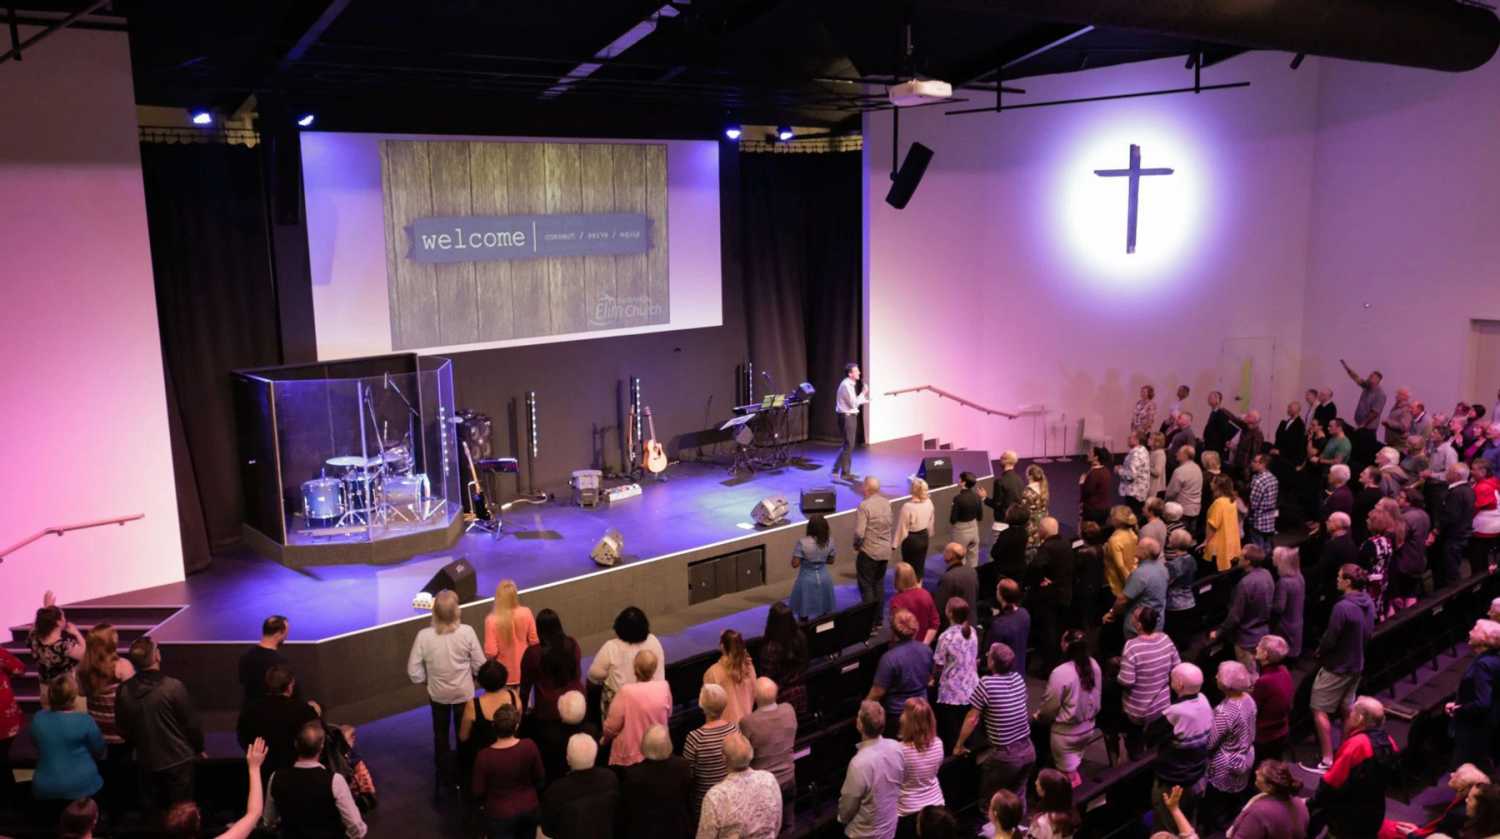 The church’s new location is able to accommodate 550 people